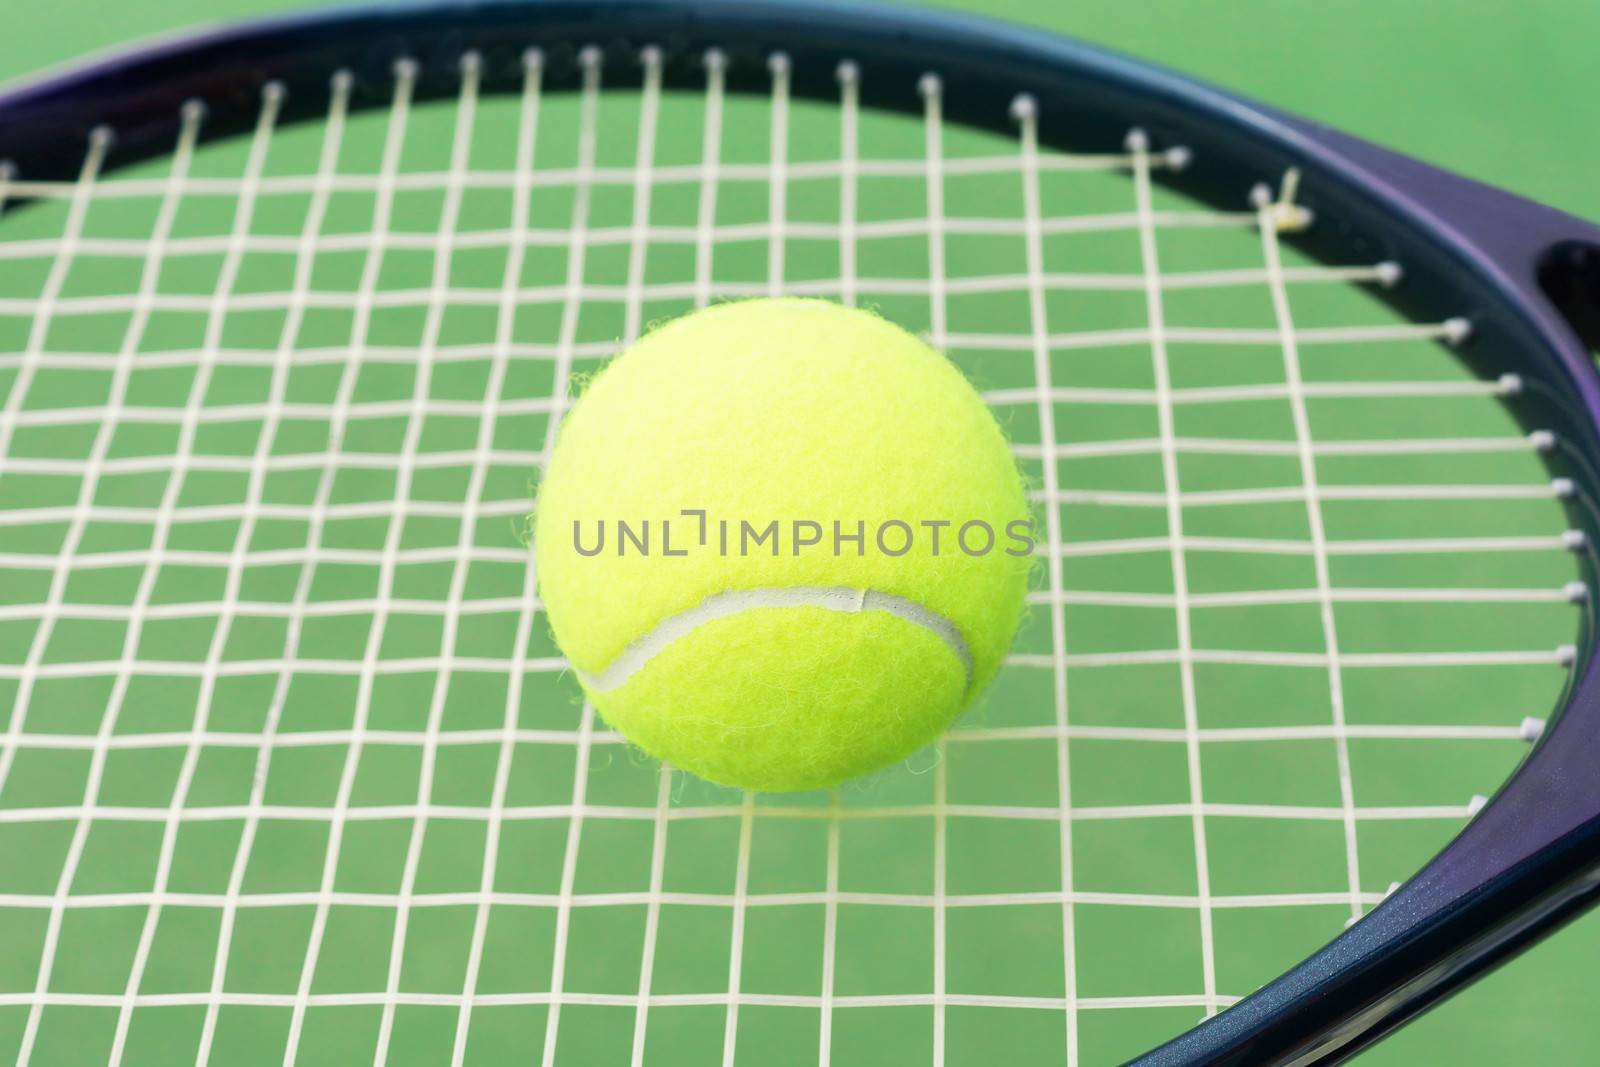 Tennis racket with ball over green hard surface court